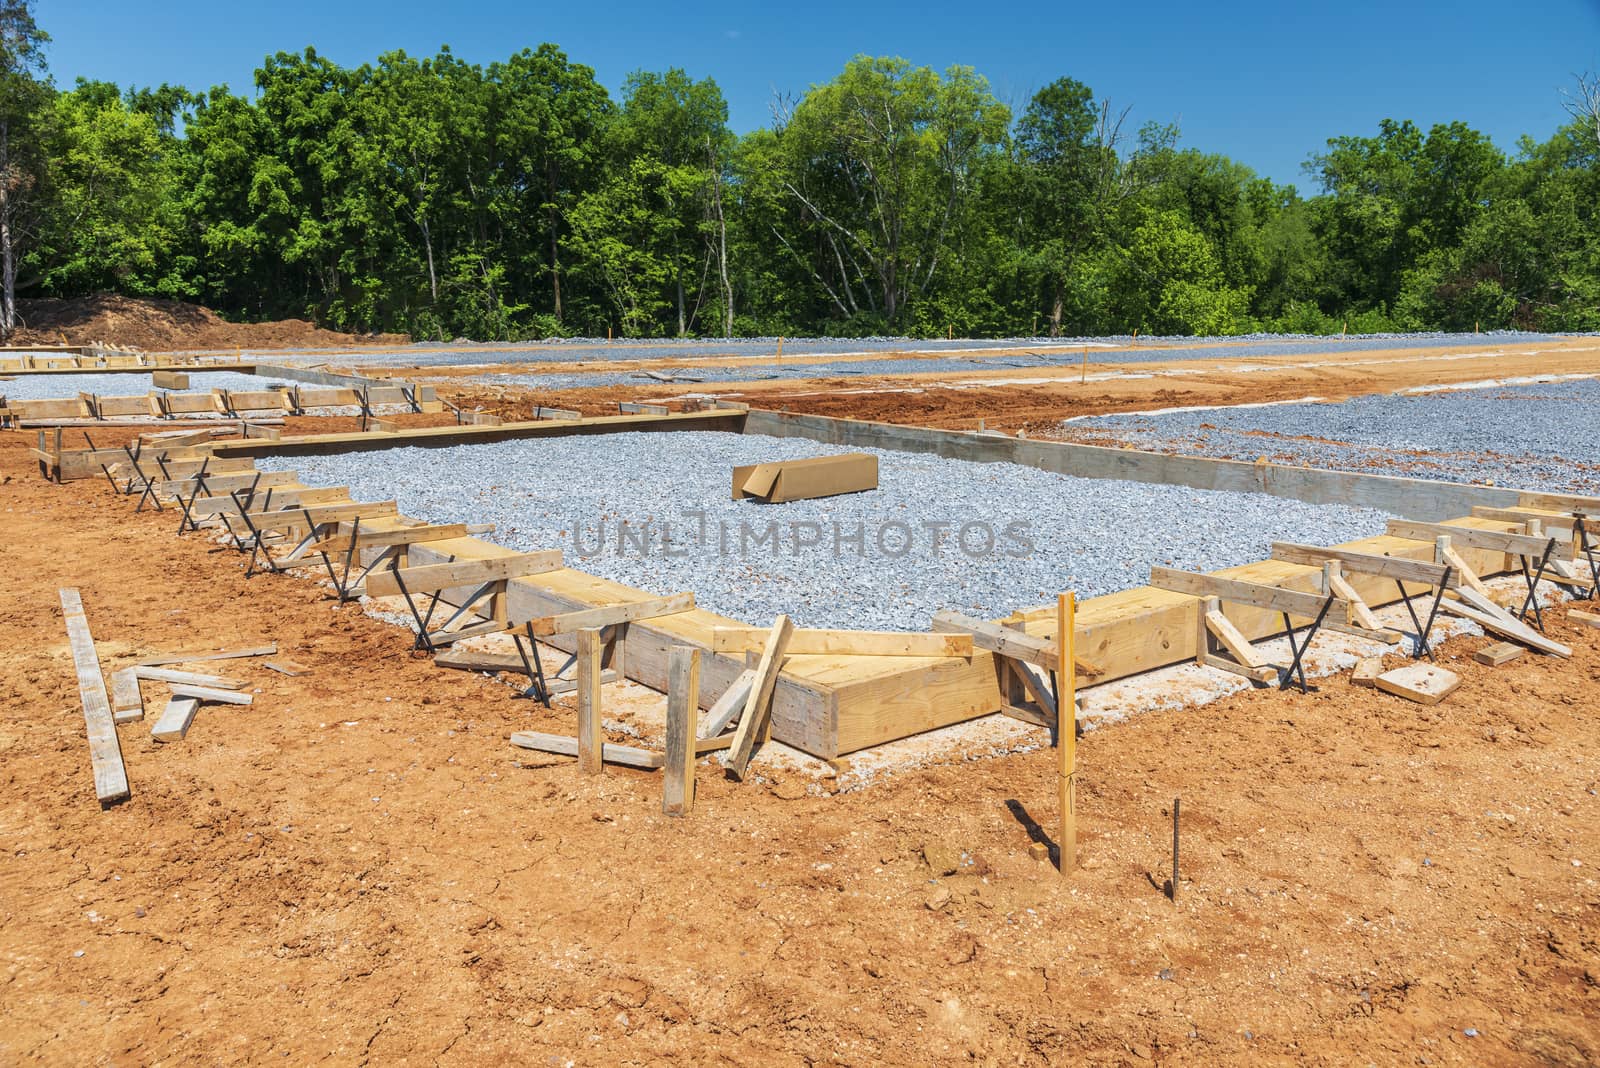 Horizontal side shot of construction foundation ground work for a new commercial building complex.